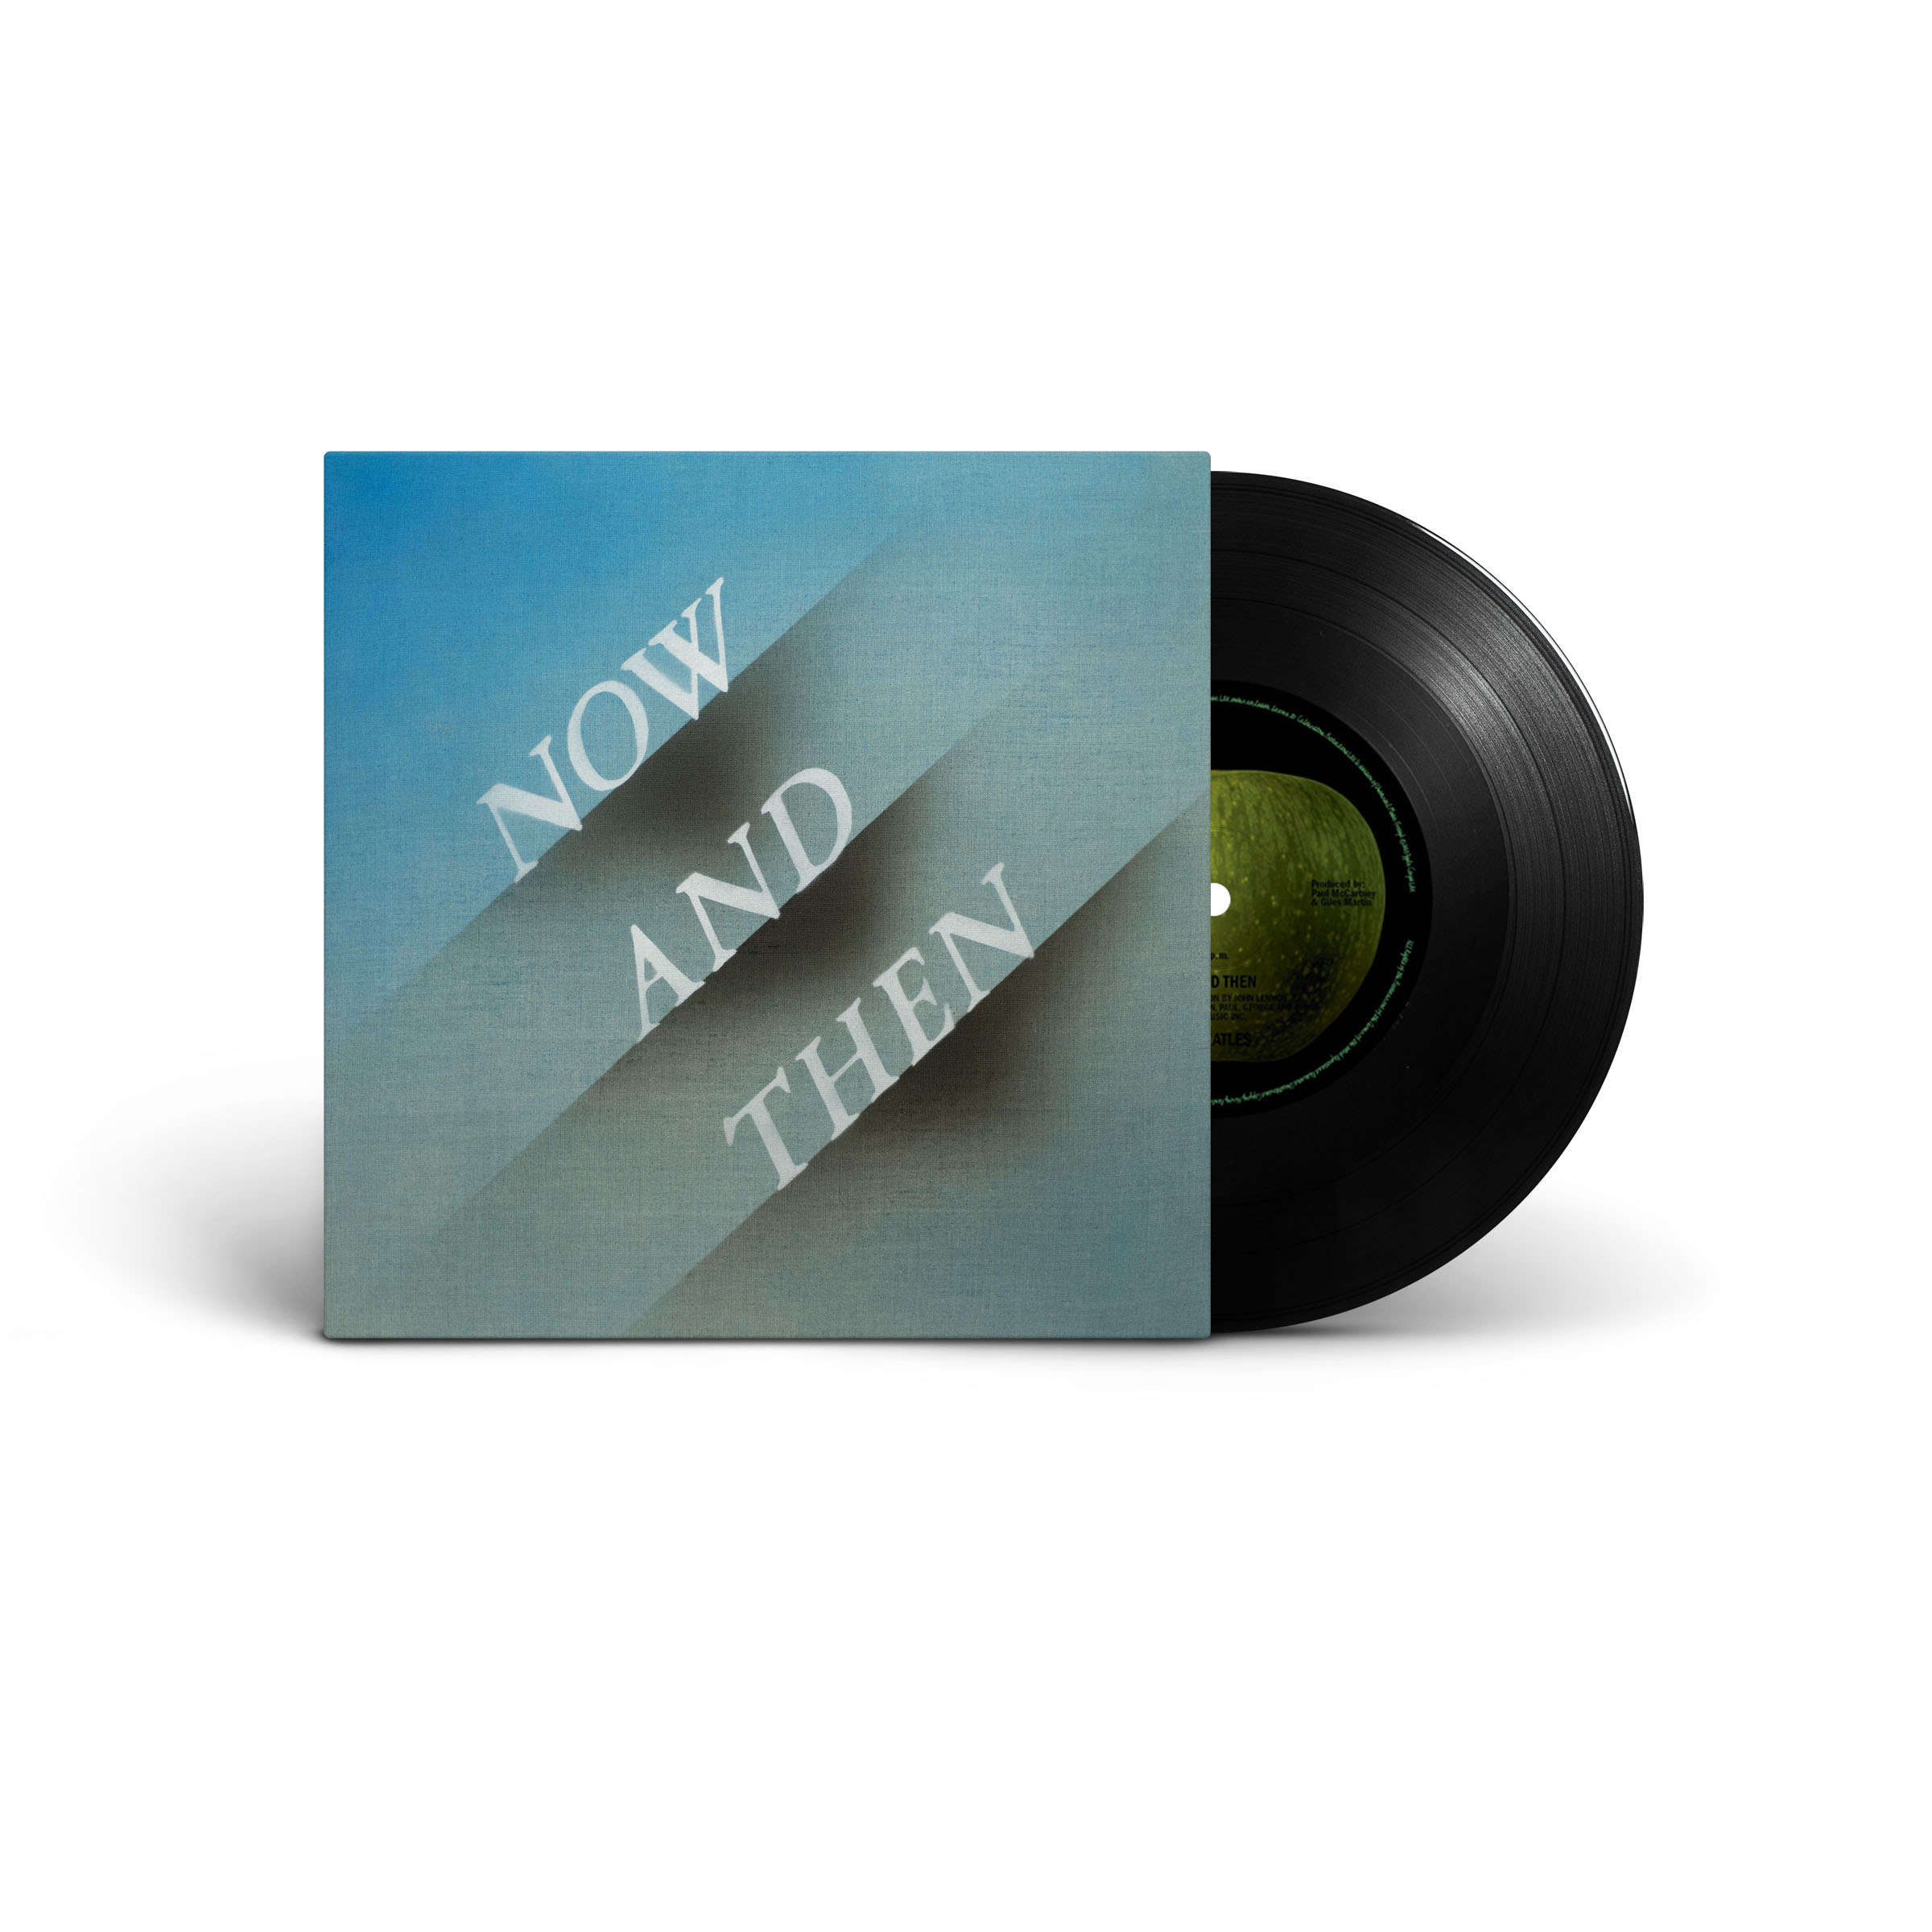 "Now And Then" 7" Single Black